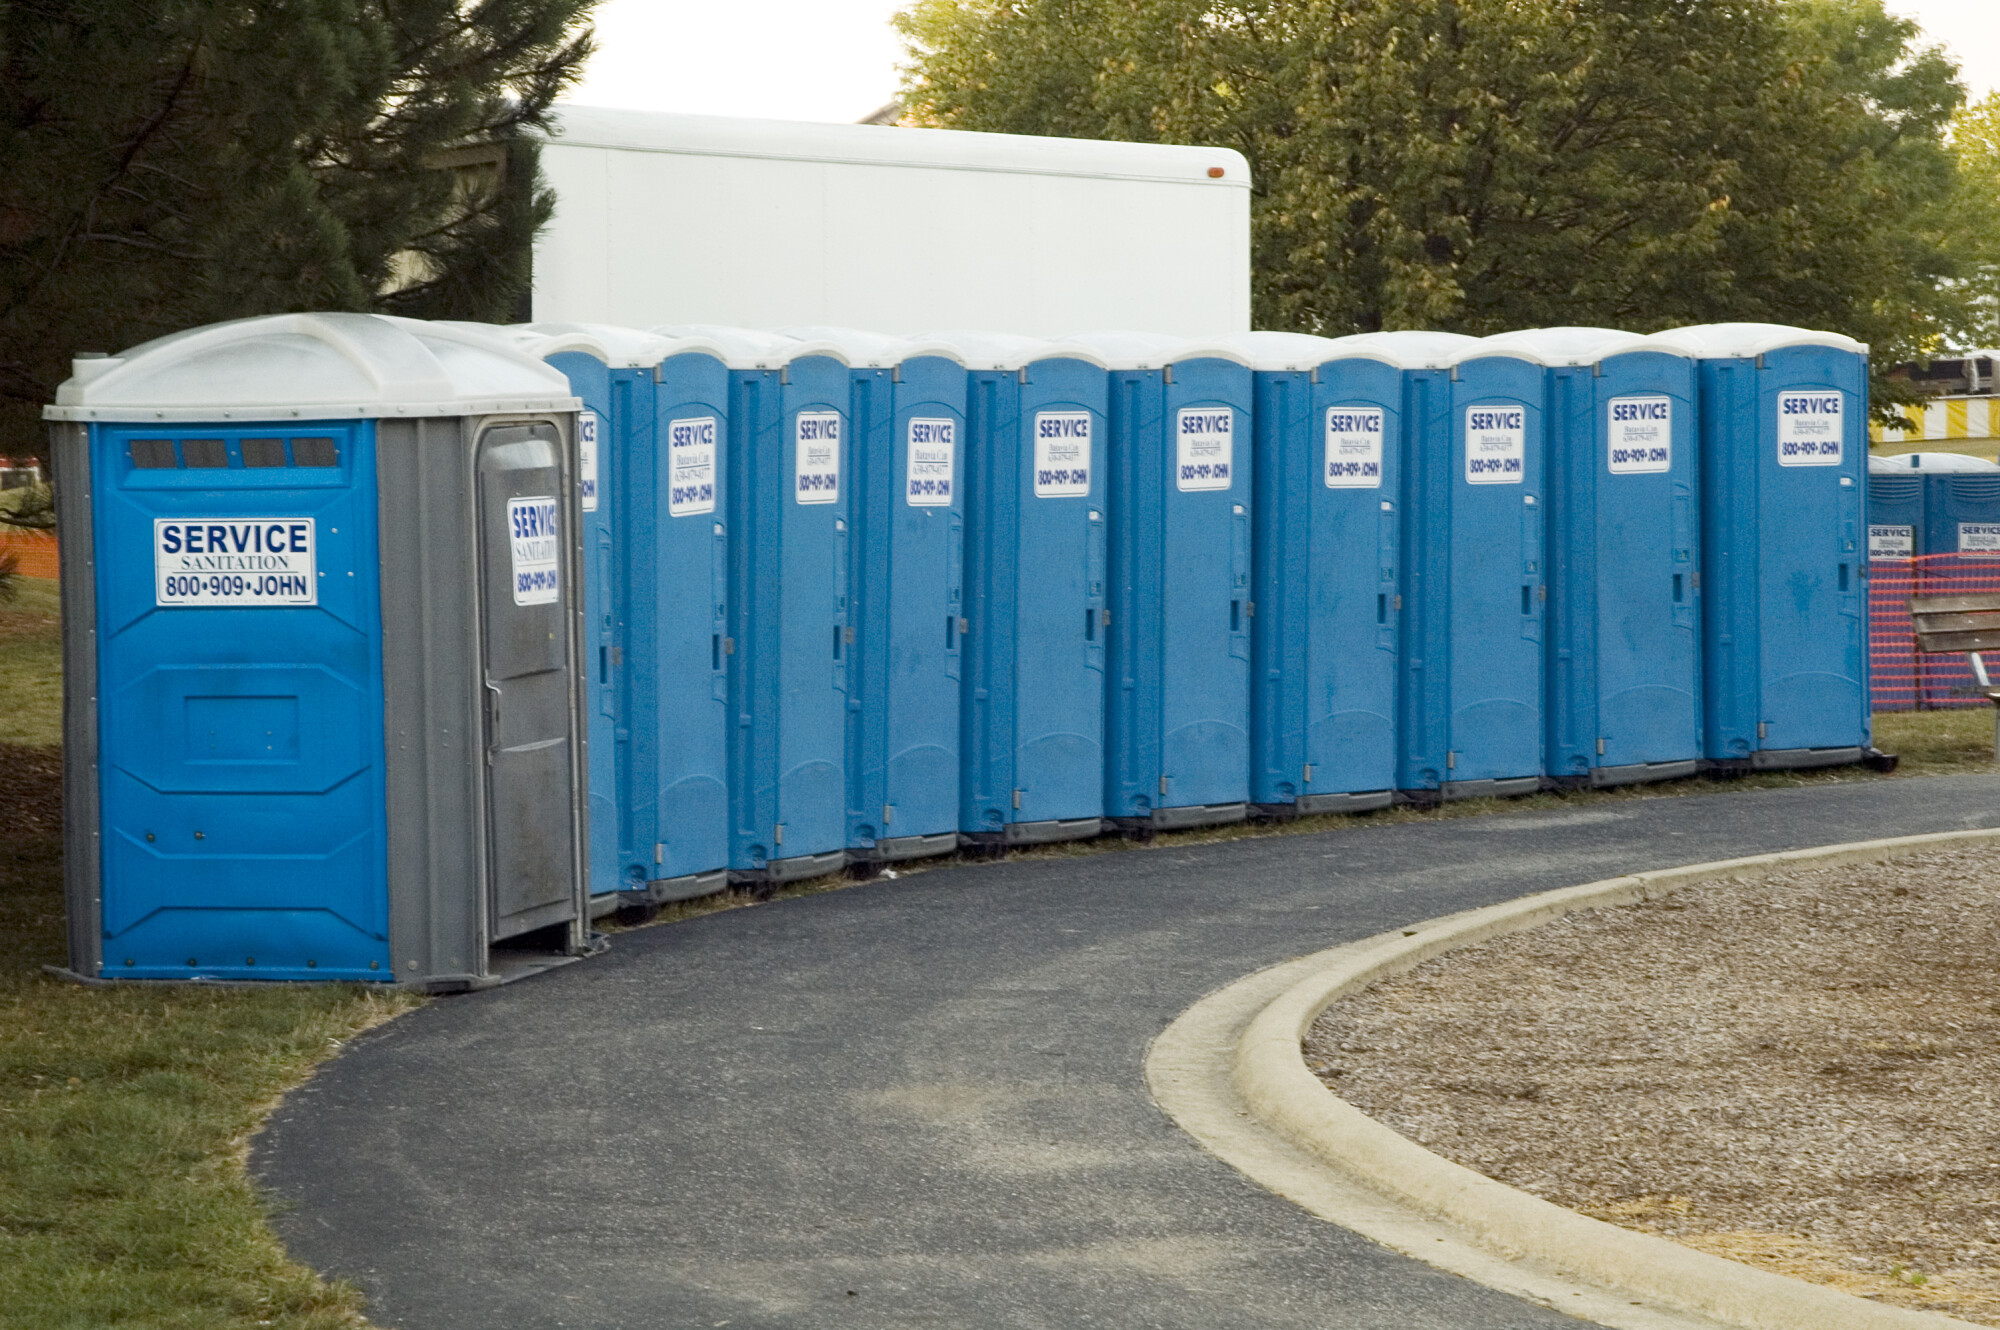 Your next event calls for a portable john rental! Learn the top four interesting reasons that renting porta potties makes sense now.